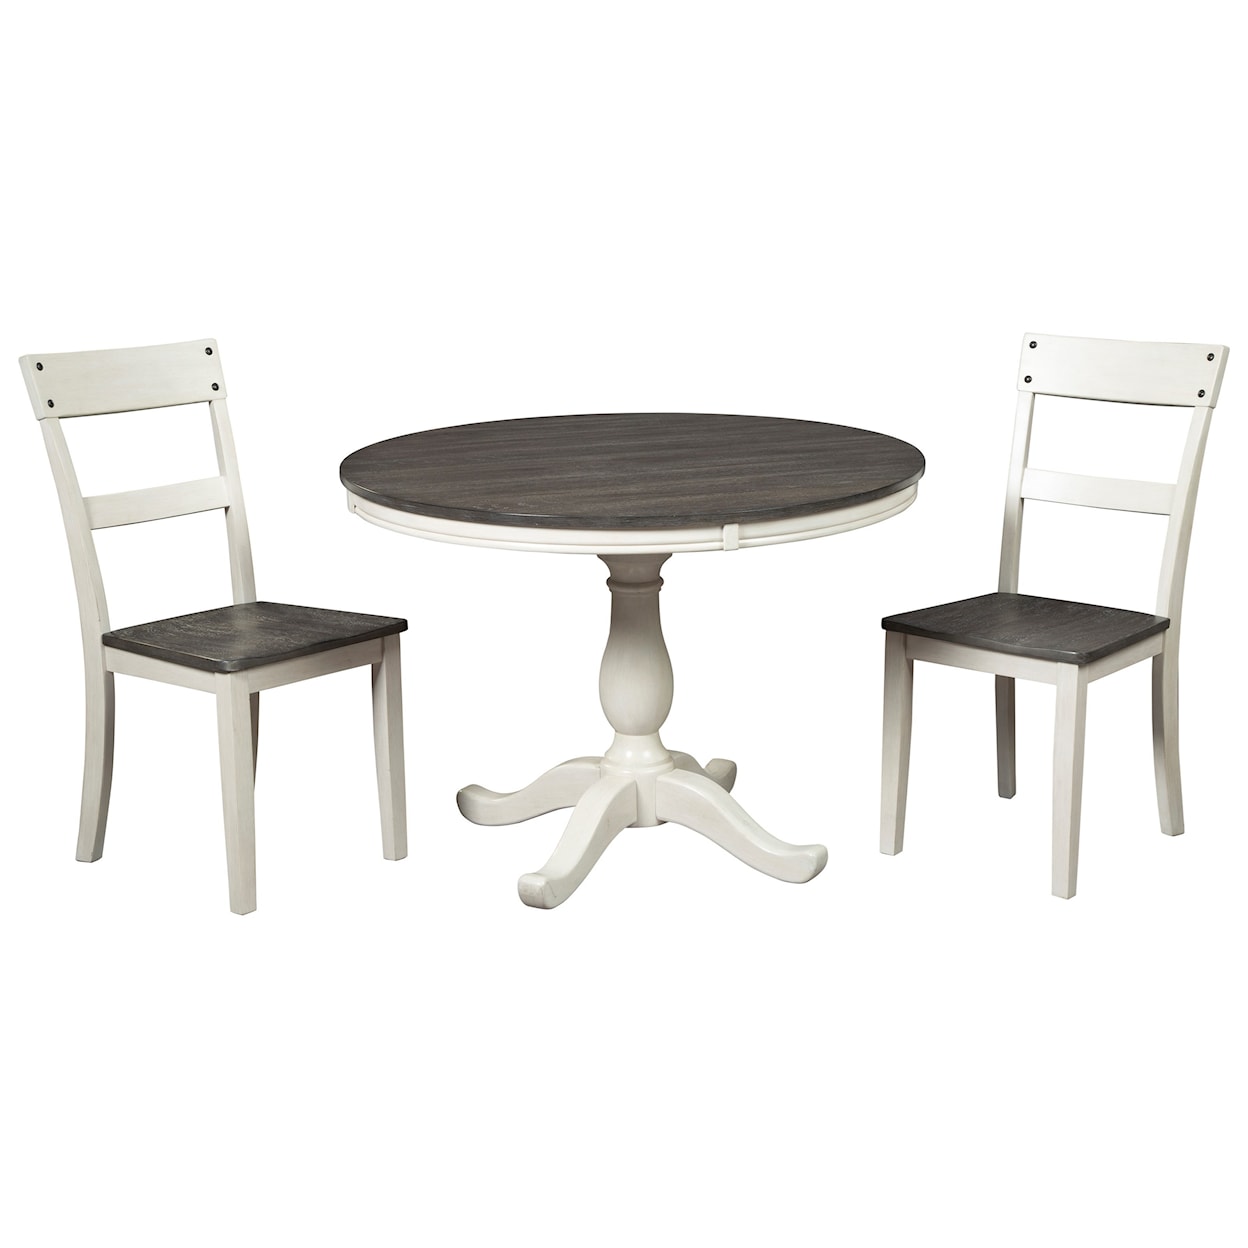 Benchcraft Nelling 3-Piece Round Dining Table Set